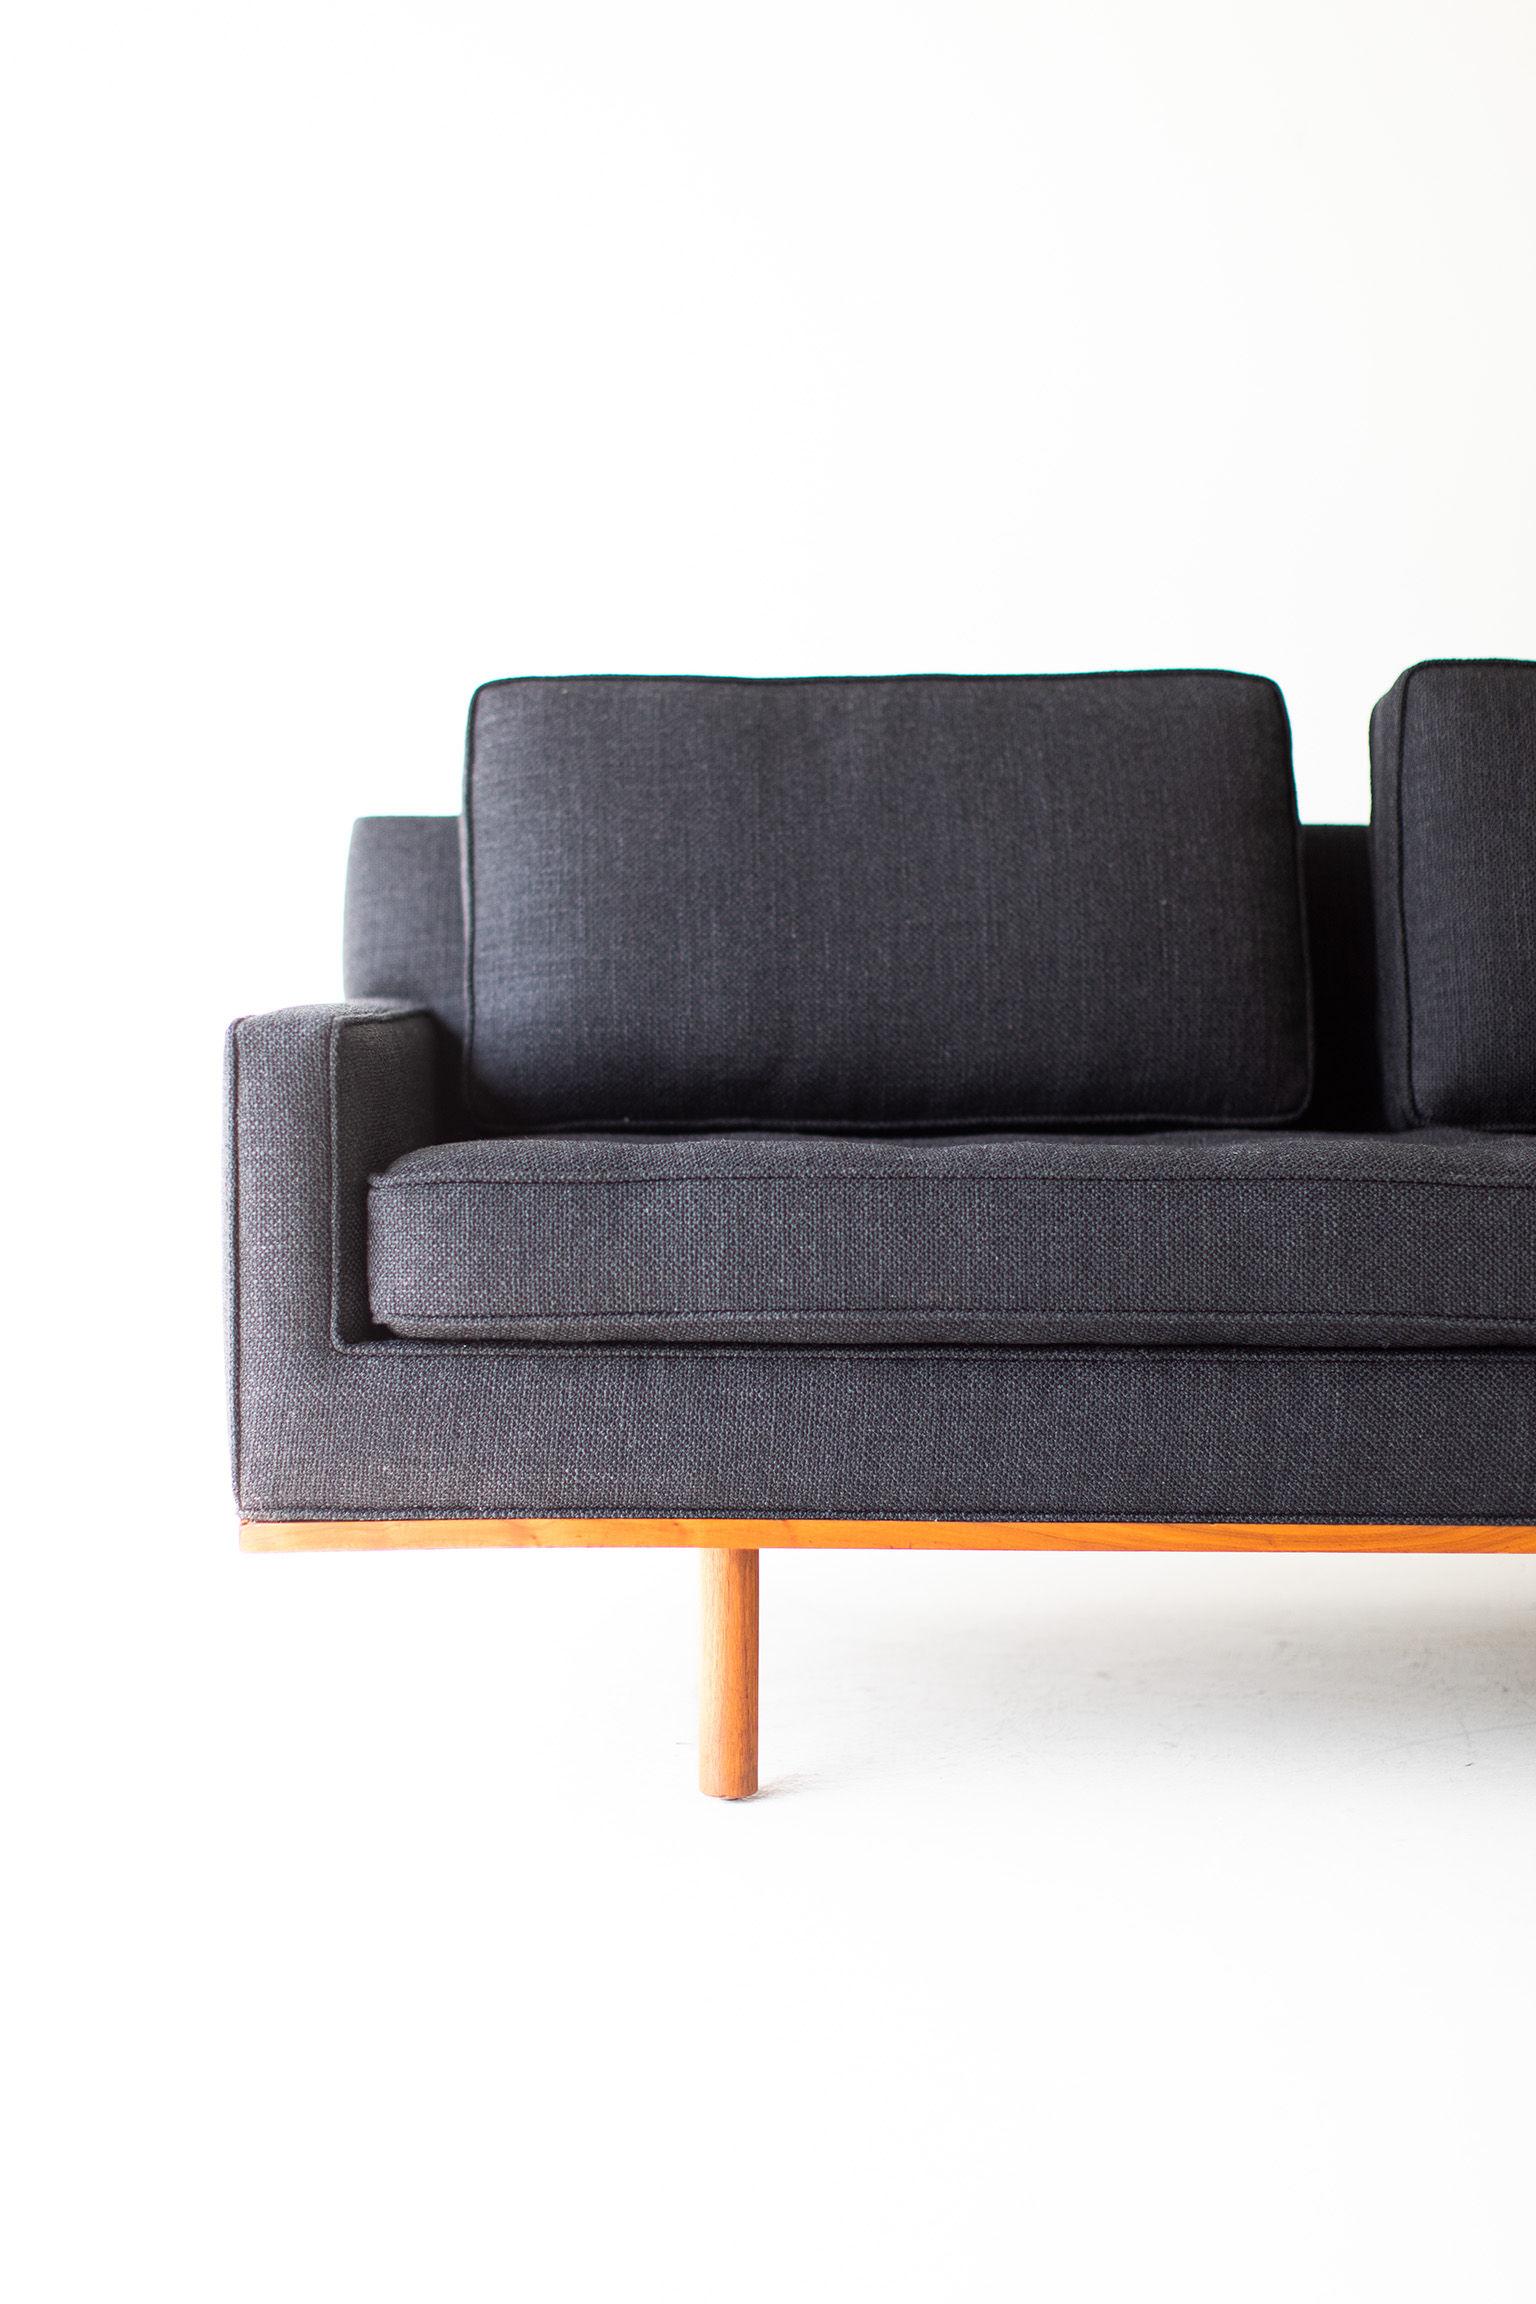 Designer: Jules Heumann

Manufacturer: Metropolitan Furniture 
Period or model: Mid-Century Modern.
Specs: Walnut, thick weave fabric

Condition:

This Jules Huemann sofa for Metropolitan Furniture is in very good restored condition. The